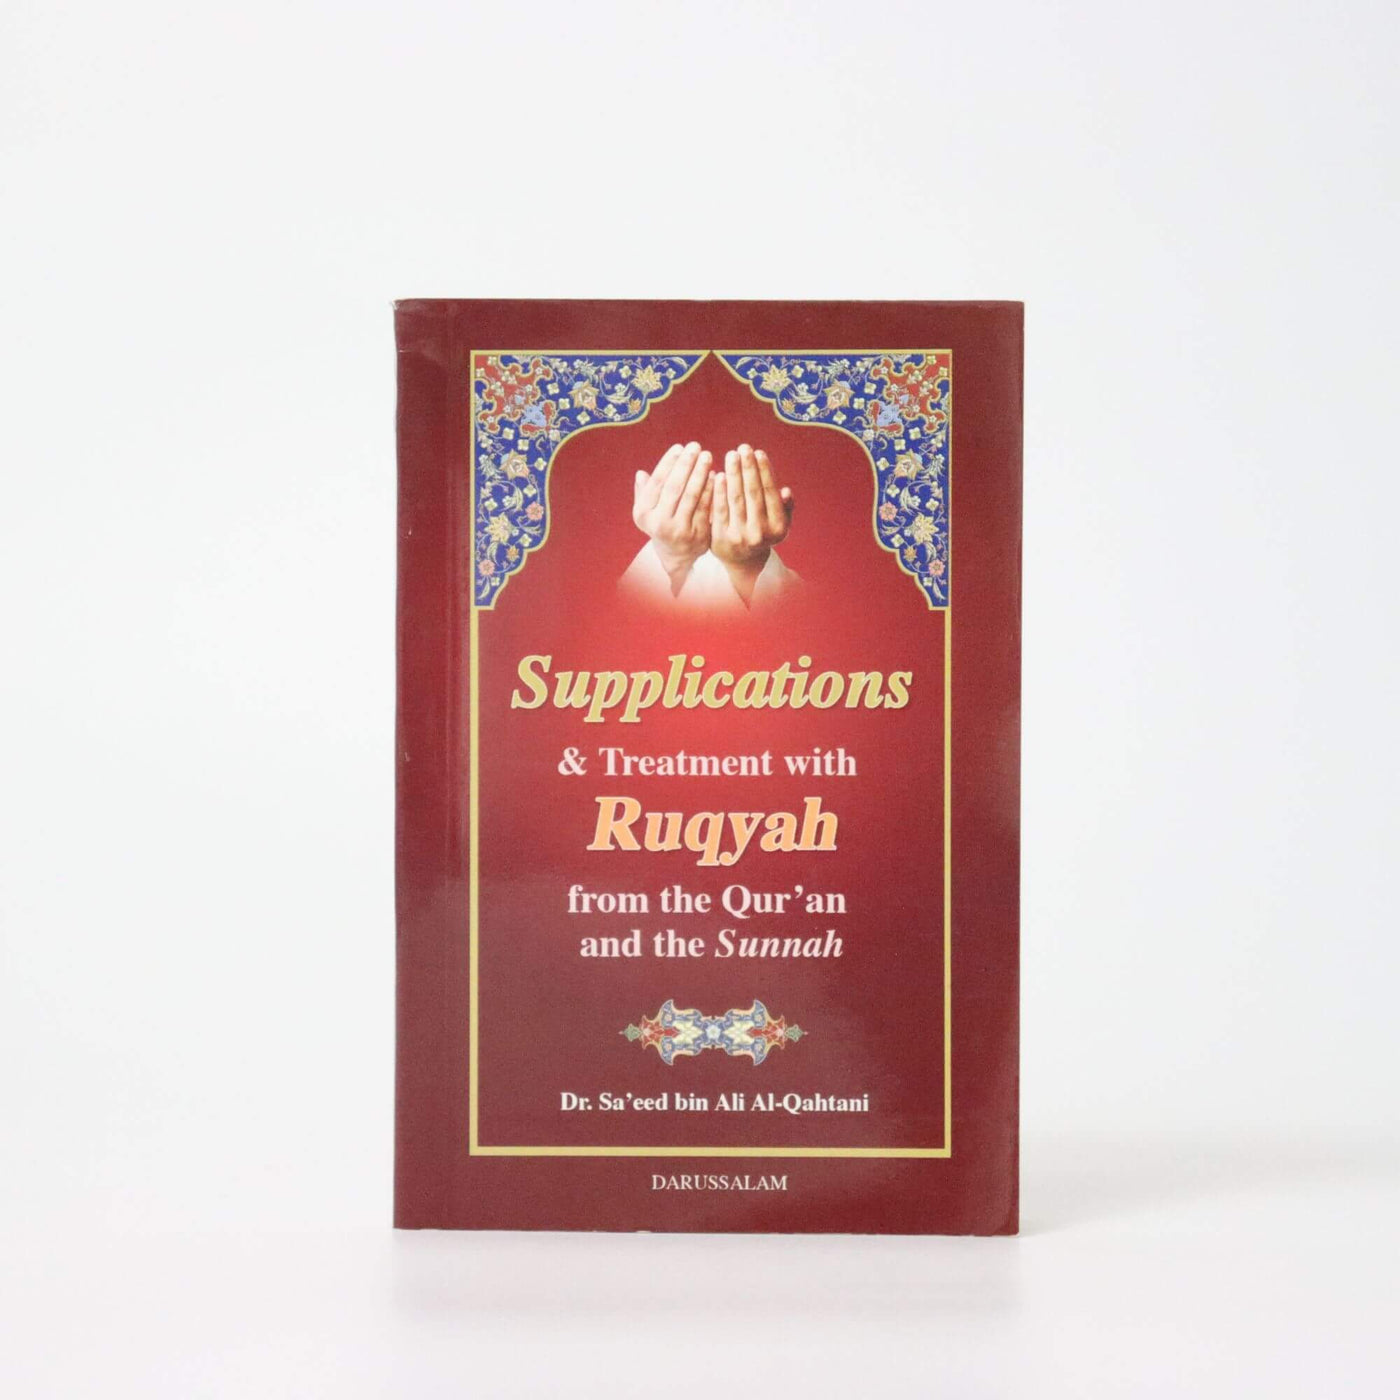 Supplications & Treatment with Ruqyah